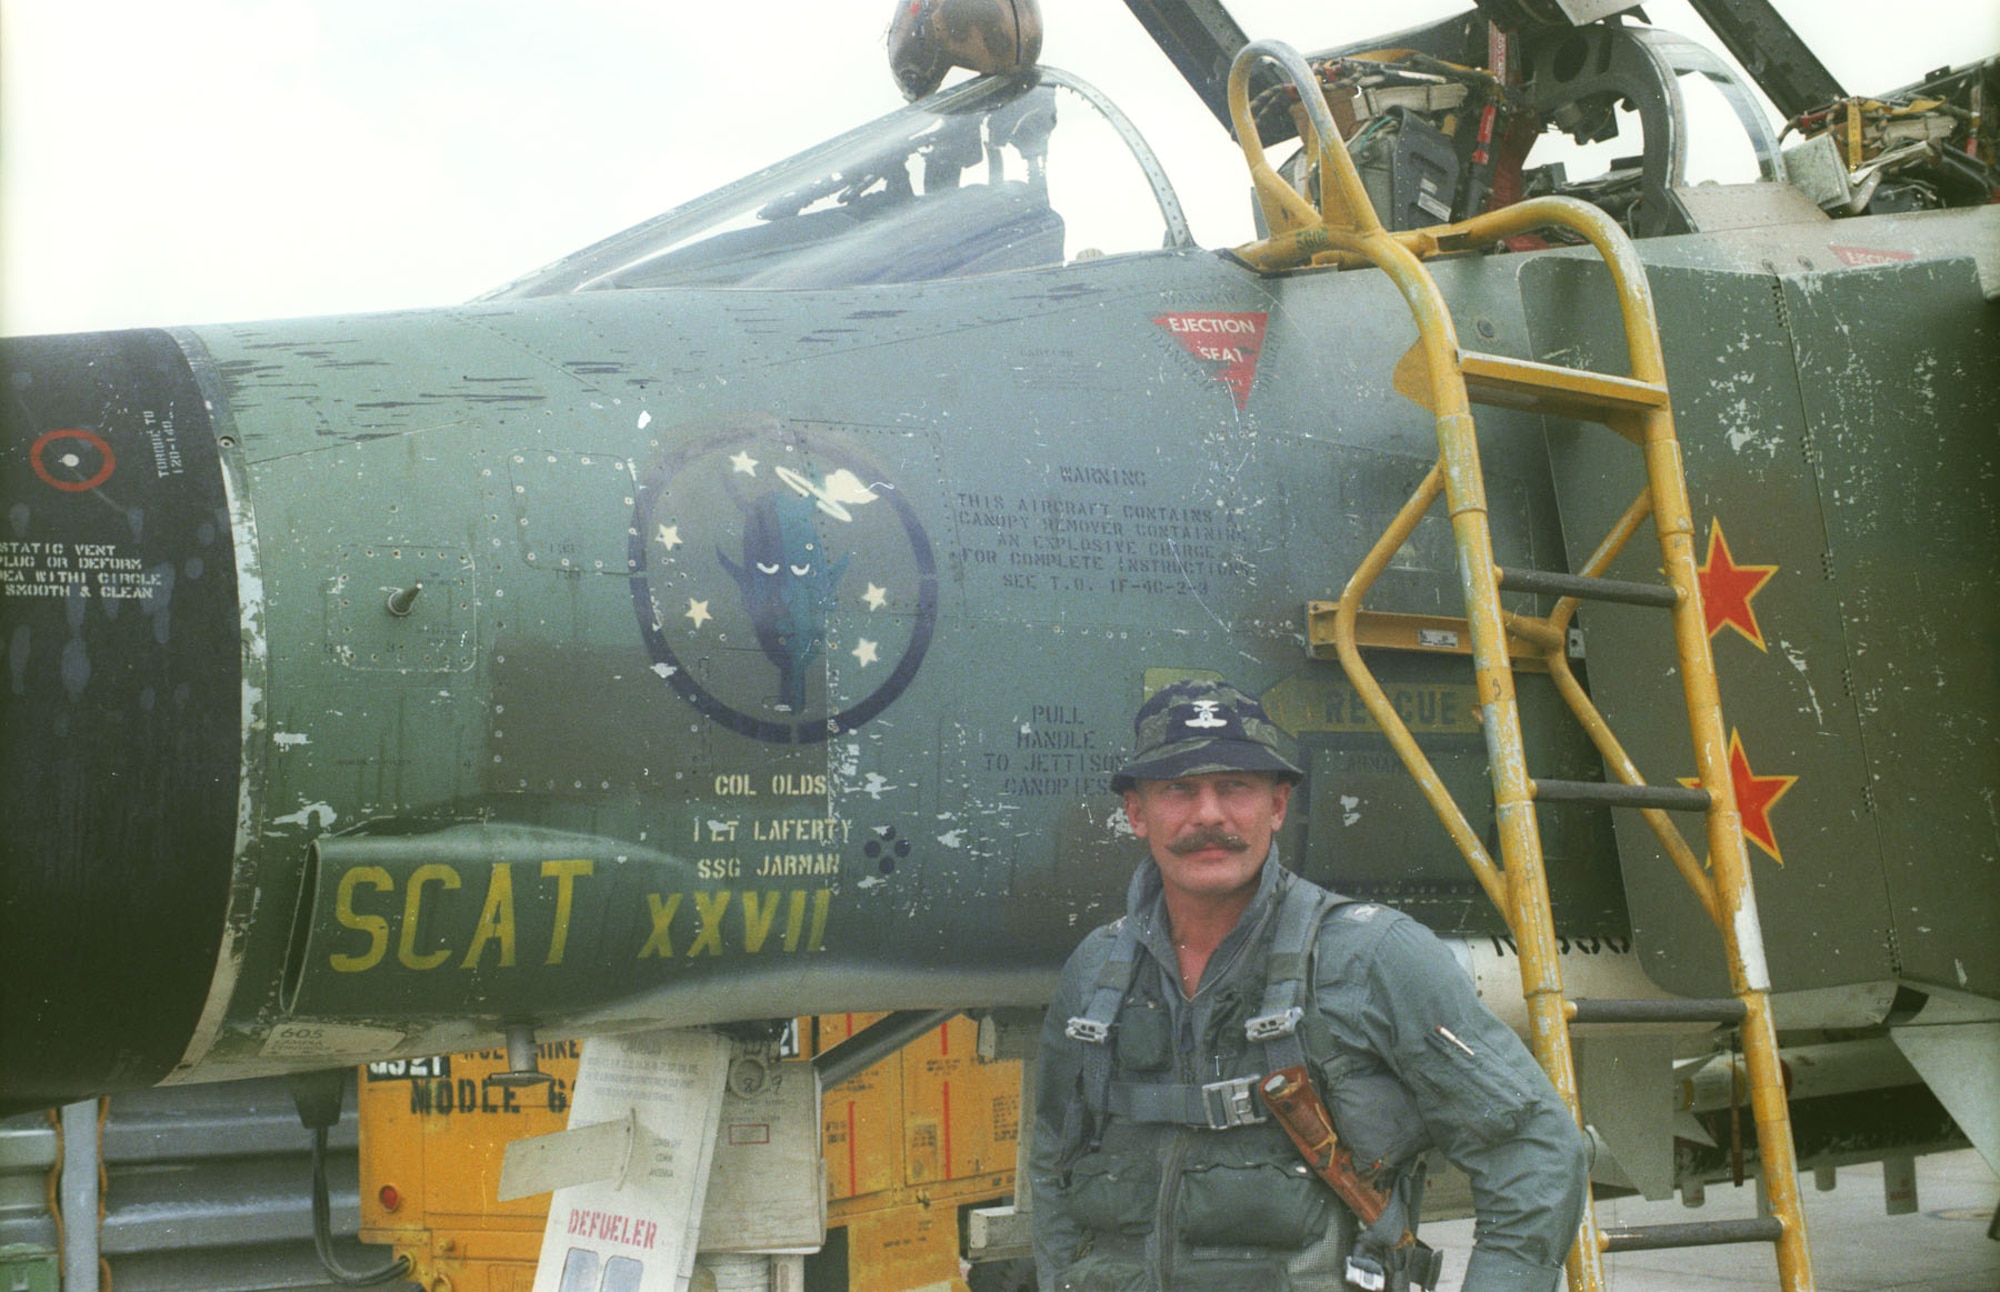 Col. Robin Olds with his F-4C SCAT XXVII, which is on display at the National Museum of the U.S. Air Force. Olds named all his aircraft after his West Point roommate Scat Davis, who could not become a military pilot due to poor eyesight. (U.S. Air Force photo)